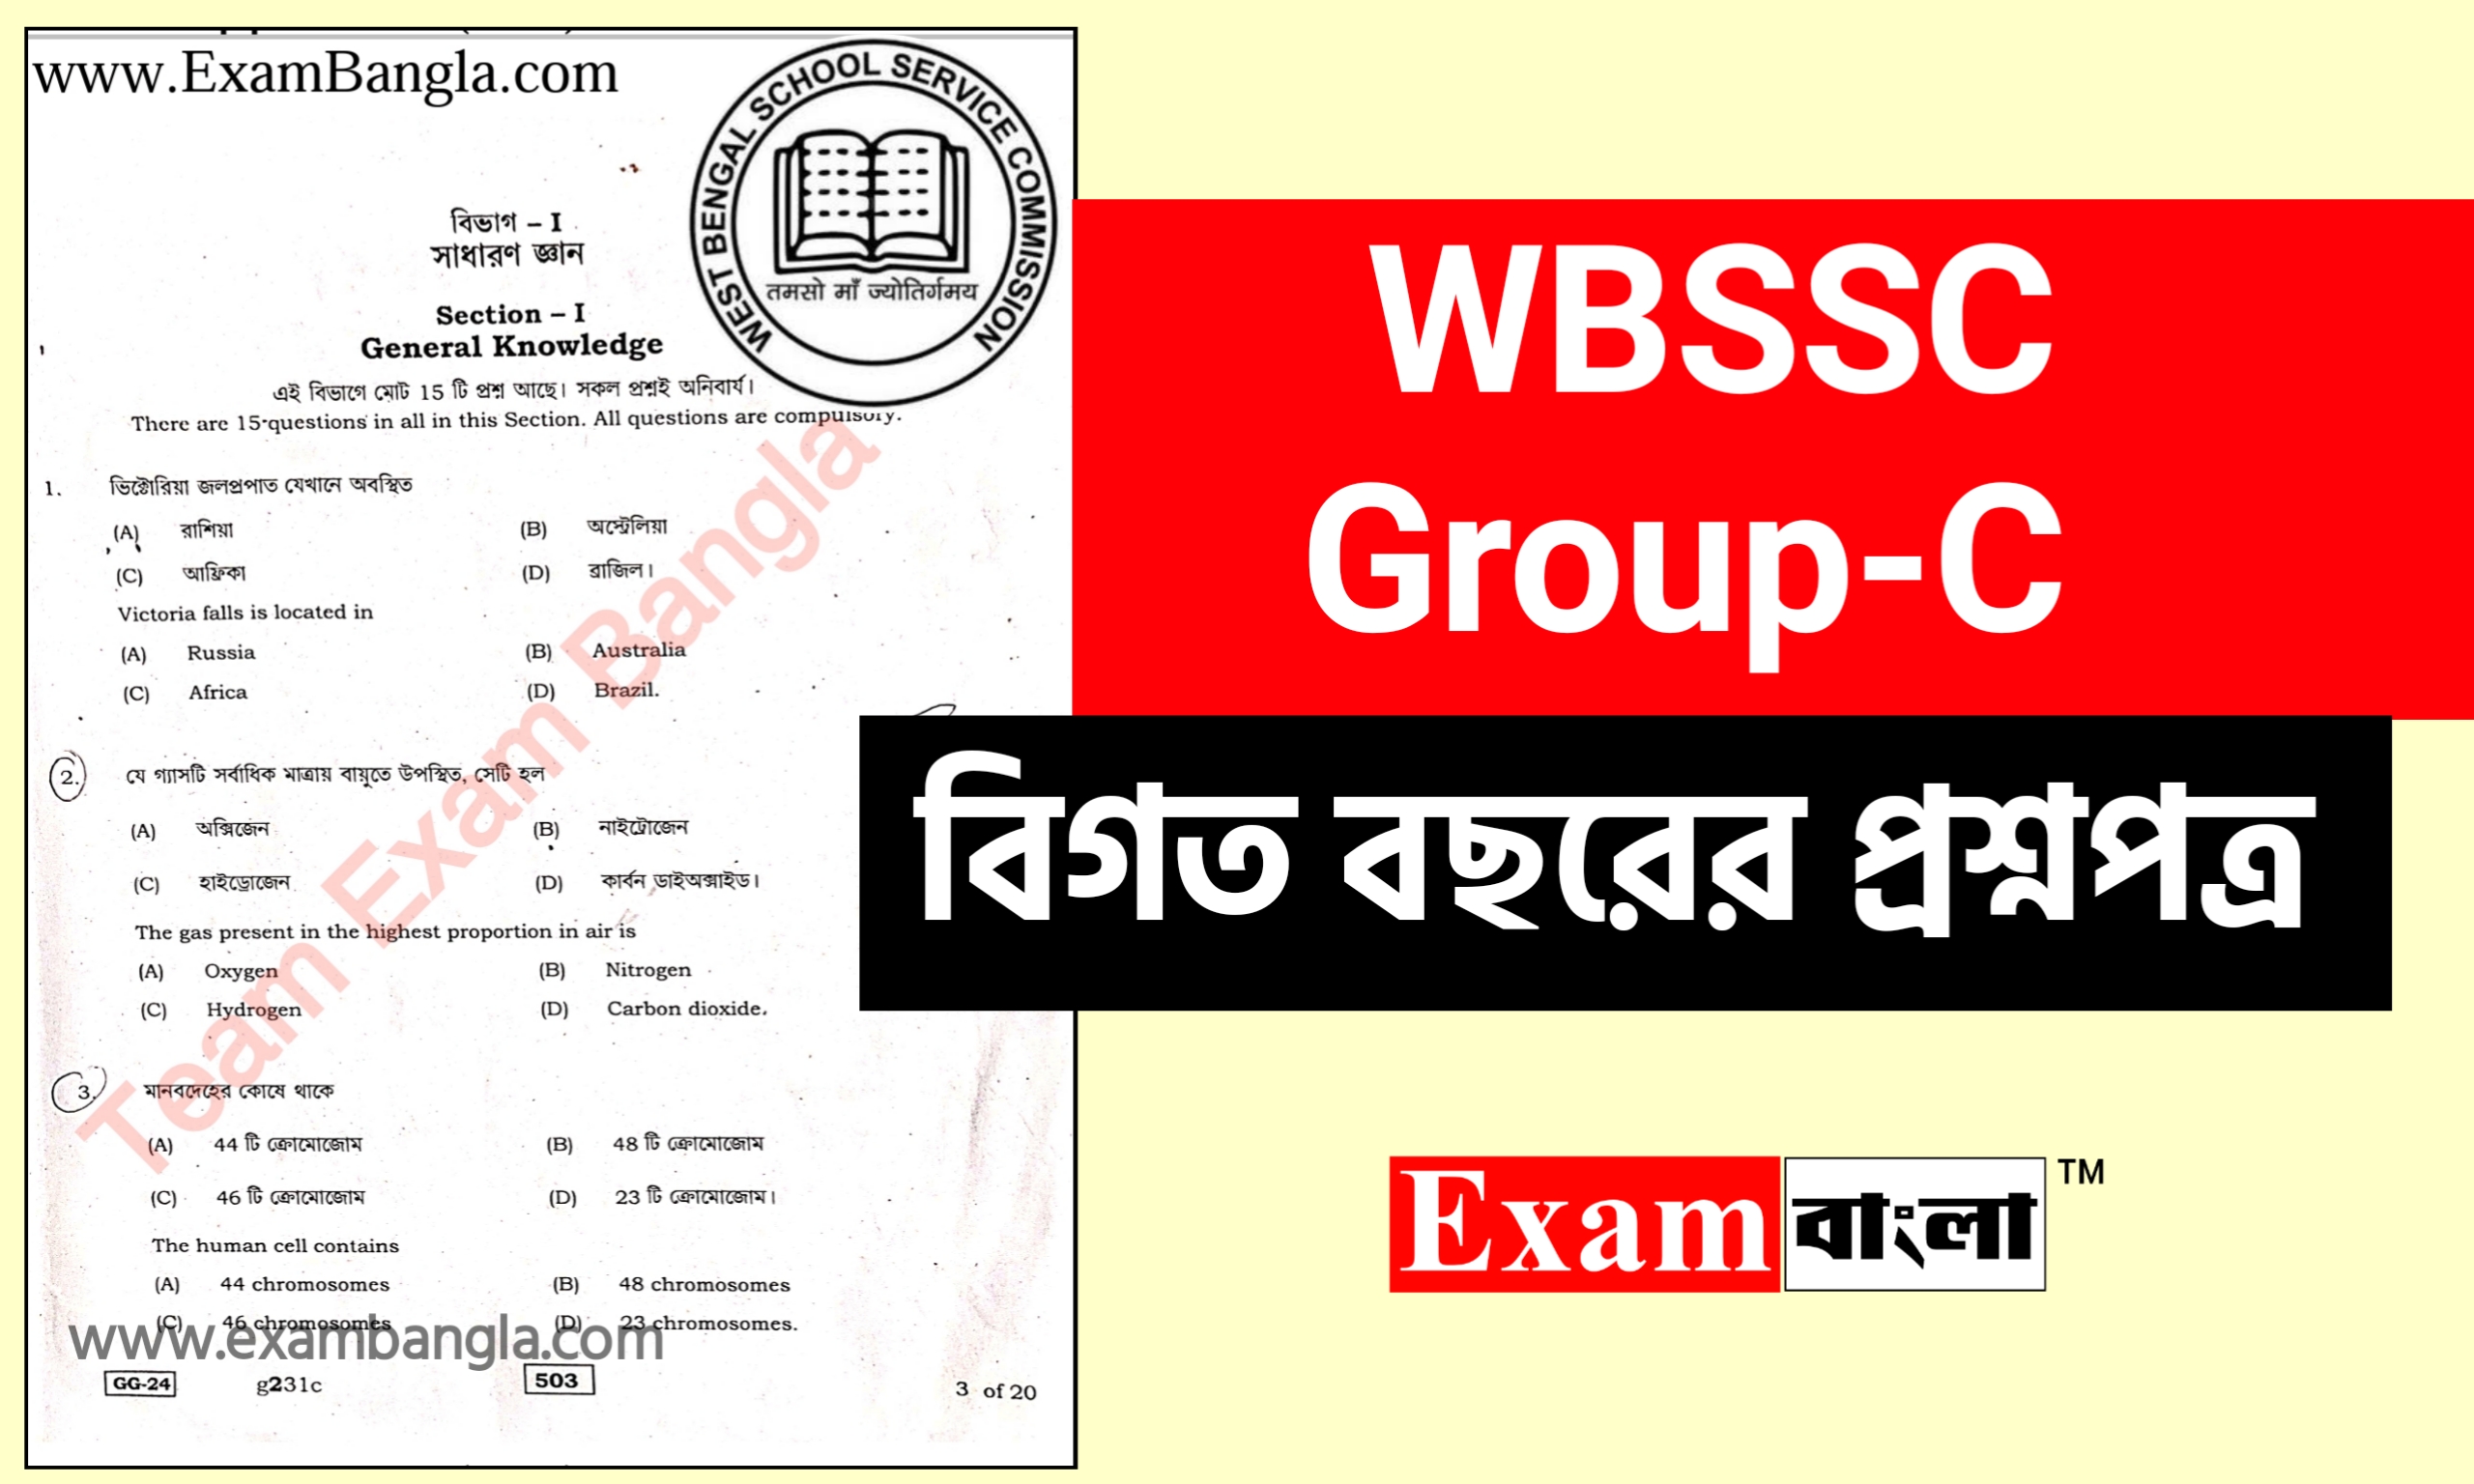 WBSSC Group- C Previous Year Question Paper